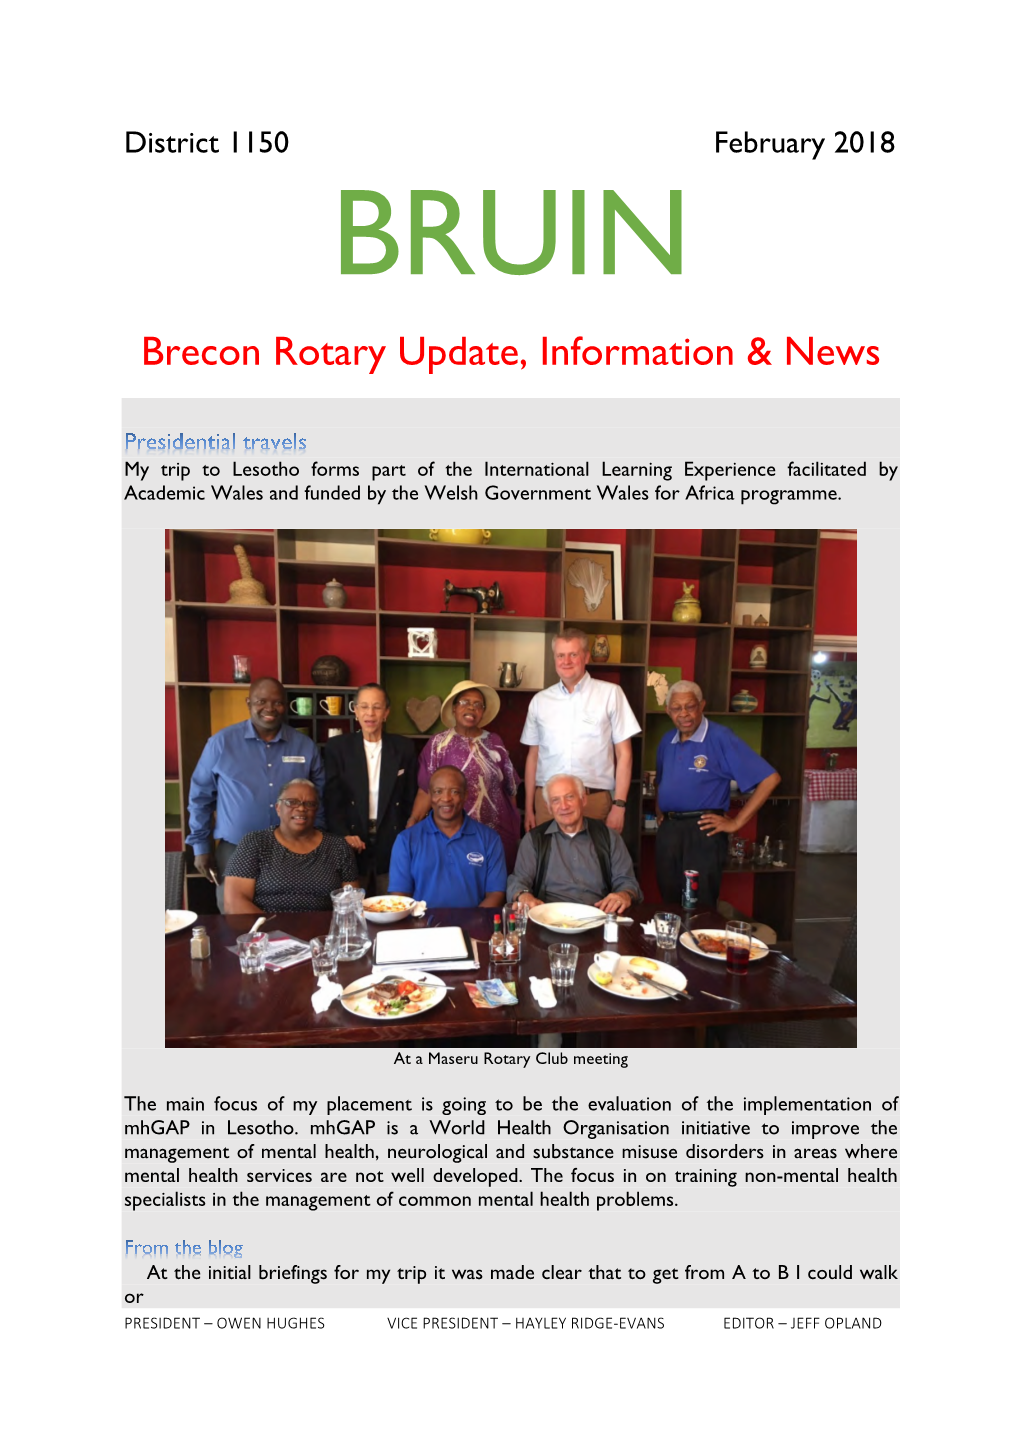 Brecon Rotary Update, Information & News